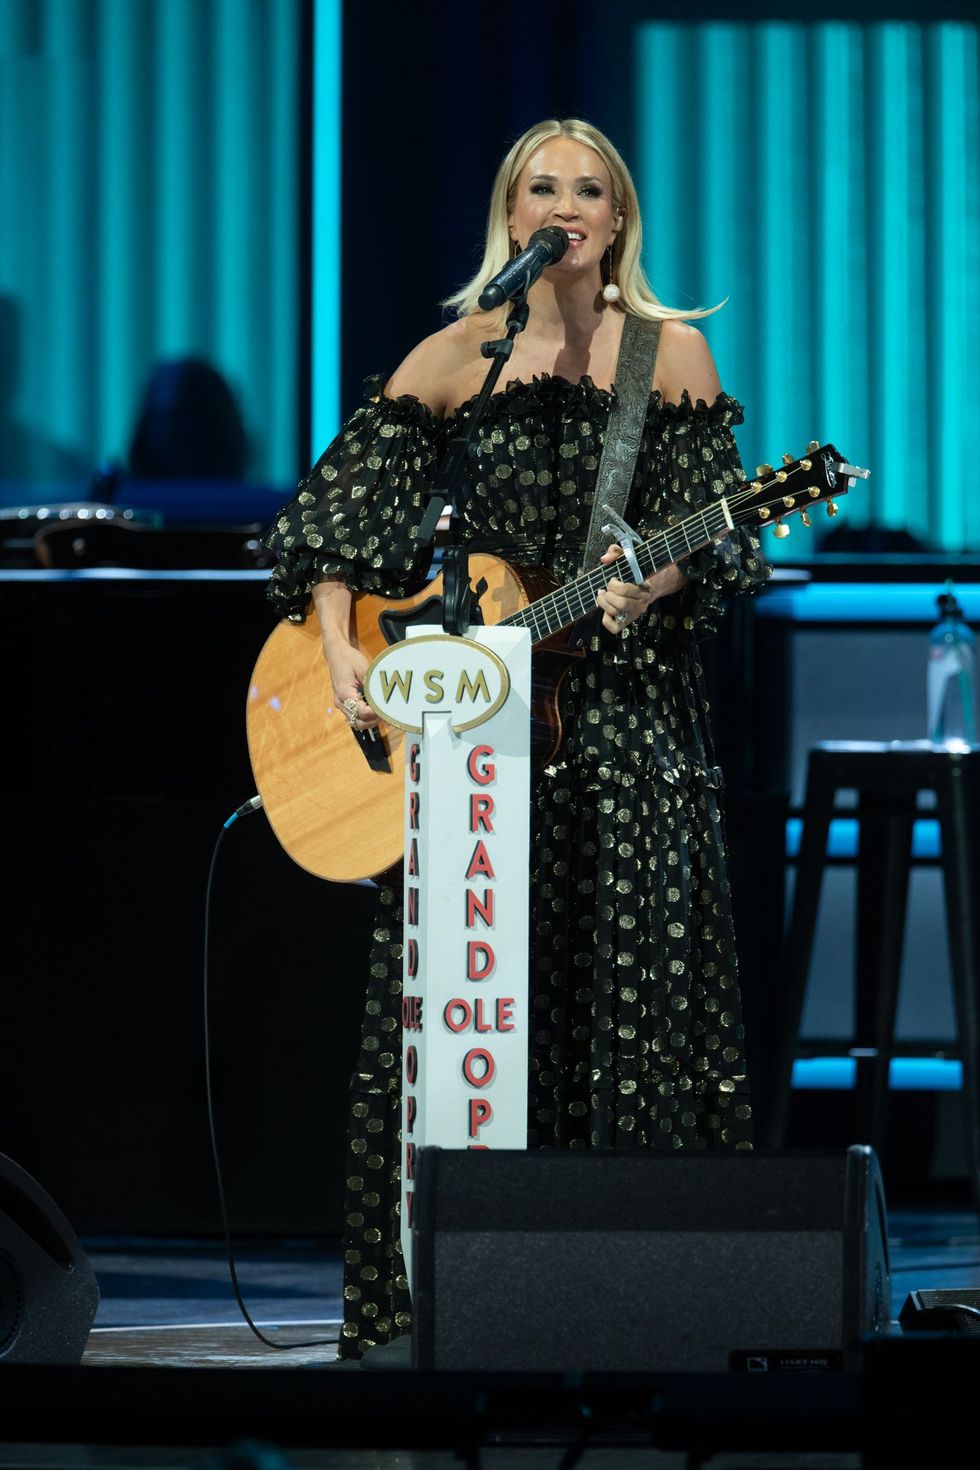 https://hips.hearstapps.com/hmg-prod/images/carrie-underwood-by-chris-hollo-8109-8-19-23-copy-64ef541541377.jpeg?crop=0.9993337774816788xw:1xh;center,top&resize=980:*